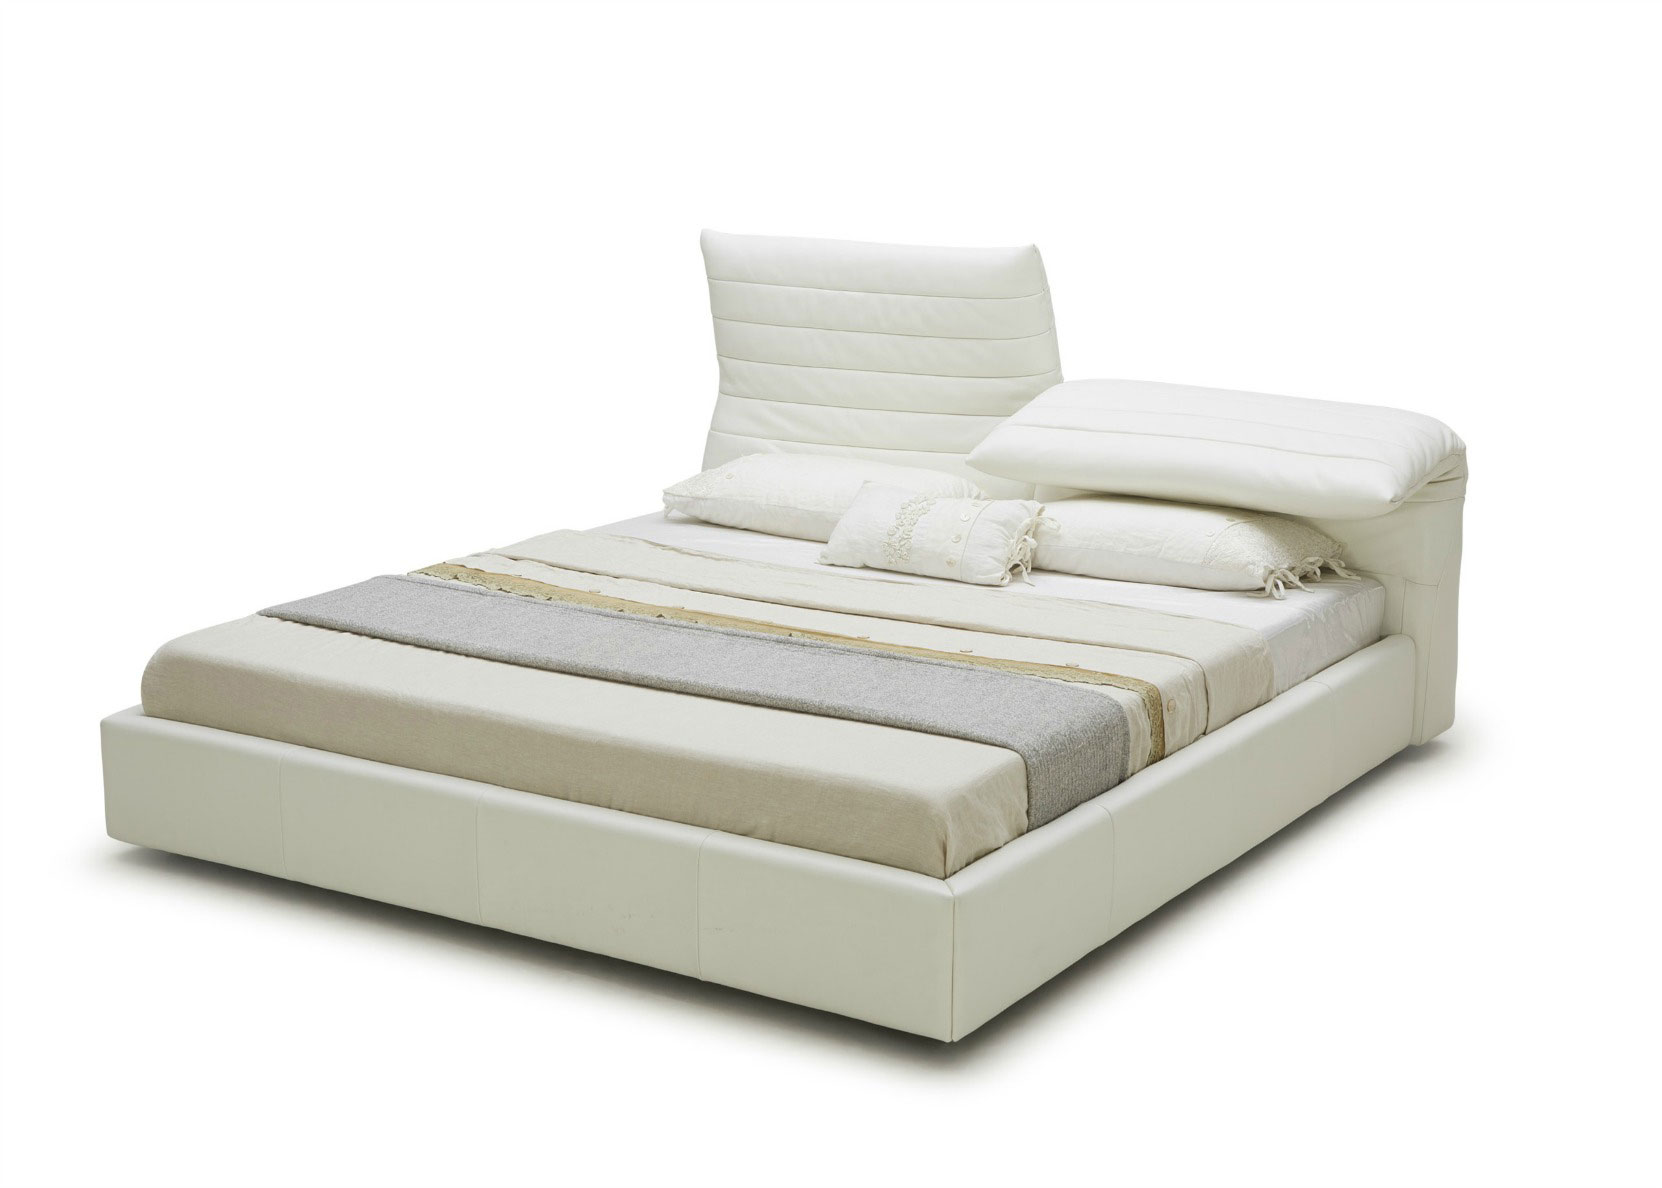 Stylish Bed In White Leather With Adjustable Headboard Not